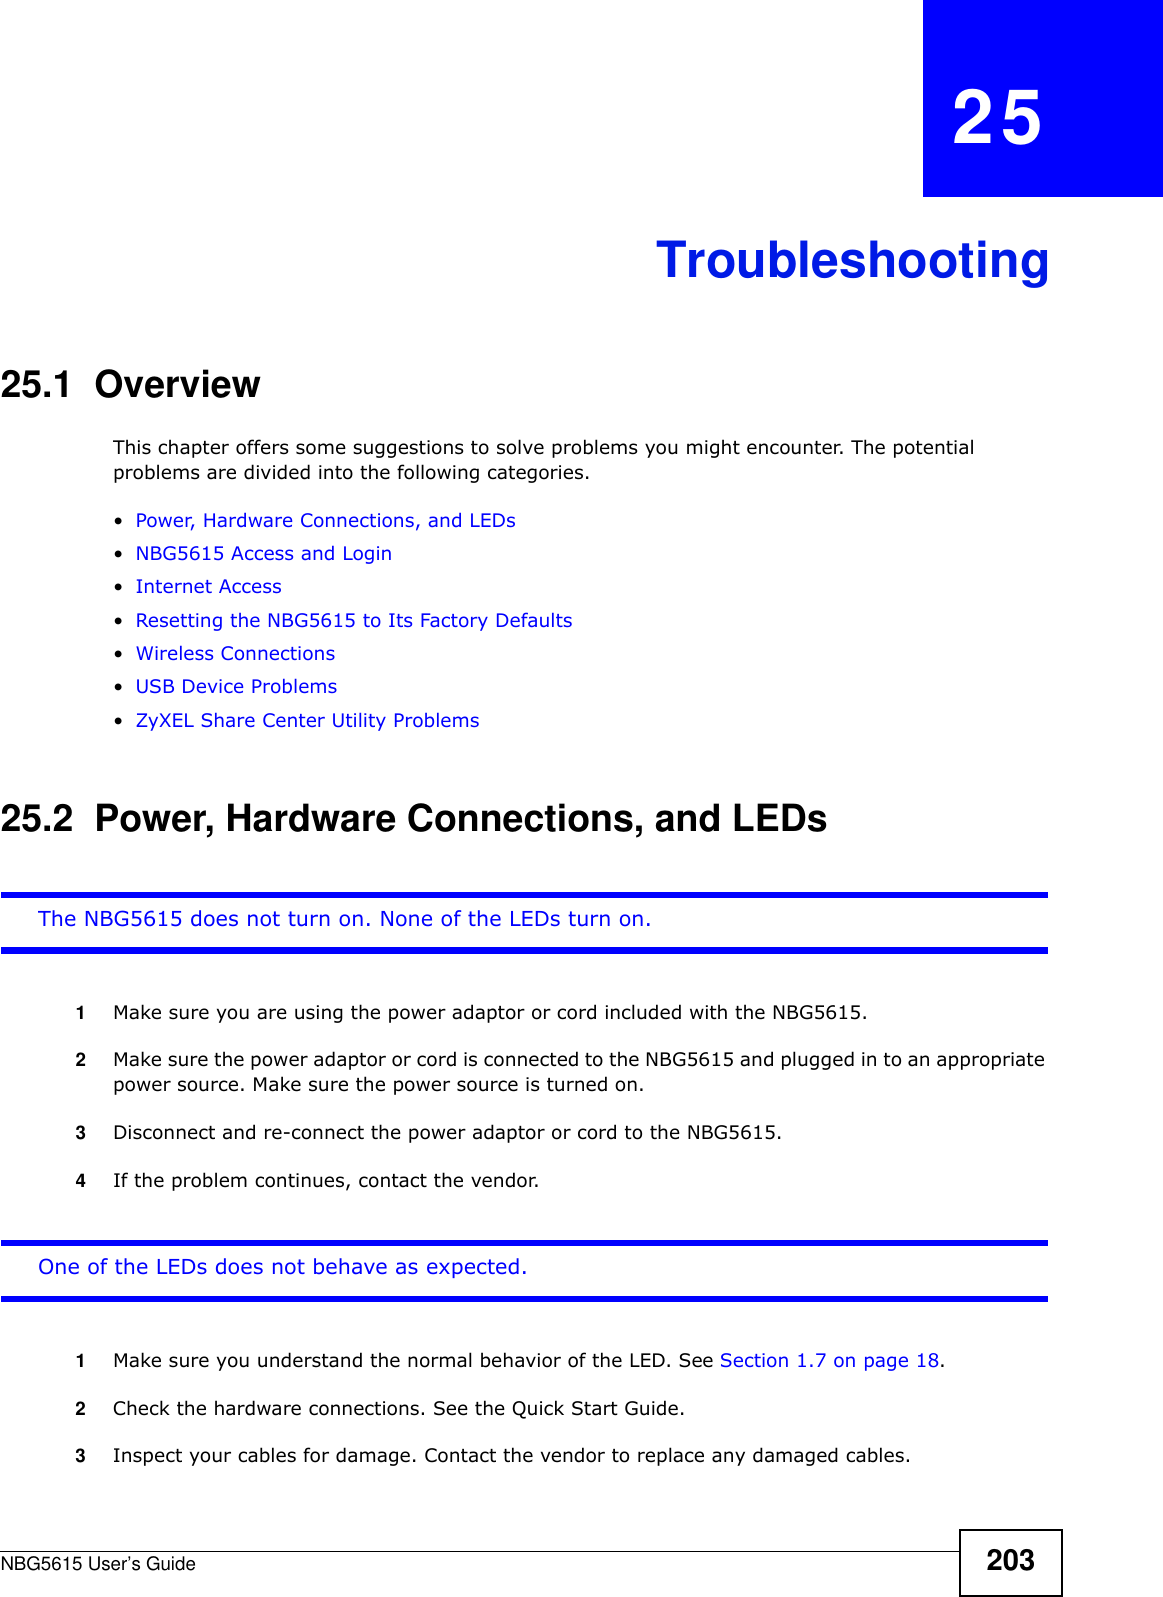 NBG5615 User’s Guide 203CHAPTER   25Troubleshooting25.1  OverviewThis chapter offers some suggestions to solve problems you might encounter. The potential problems are divided into the following categories. •Power, Hardware Connections, and LEDs•NBG5615 Access and Login•Internet Access•Resetting the NBG5615 to Its Factory Defaults•Wireless Connections•USB Device Problems•ZyXEL Share Center Utility Problems25.2  Power, Hardware Connections, and LEDsThe NBG5615 does not turn on. None of the LEDs turn on.1Make sure you are using the power adaptor or cord included with the NBG5615.2Make sure the power adaptor or cord is connected to the NBG5615 and plugged in to an appropriate power source. Make sure the power source is turned on.3Disconnect and re-connect the power adaptor or cord to the NBG5615.4If the problem continues, contact the vendor.One of the LEDs does not behave as expected.1Make sure you understand the normal behavior of the LED. See Section 1.7 on page 18.2Check the hardware connections. See the Quick Start Guide. 3Inspect your cables for damage. Contact the vendor to replace any damaged cables.